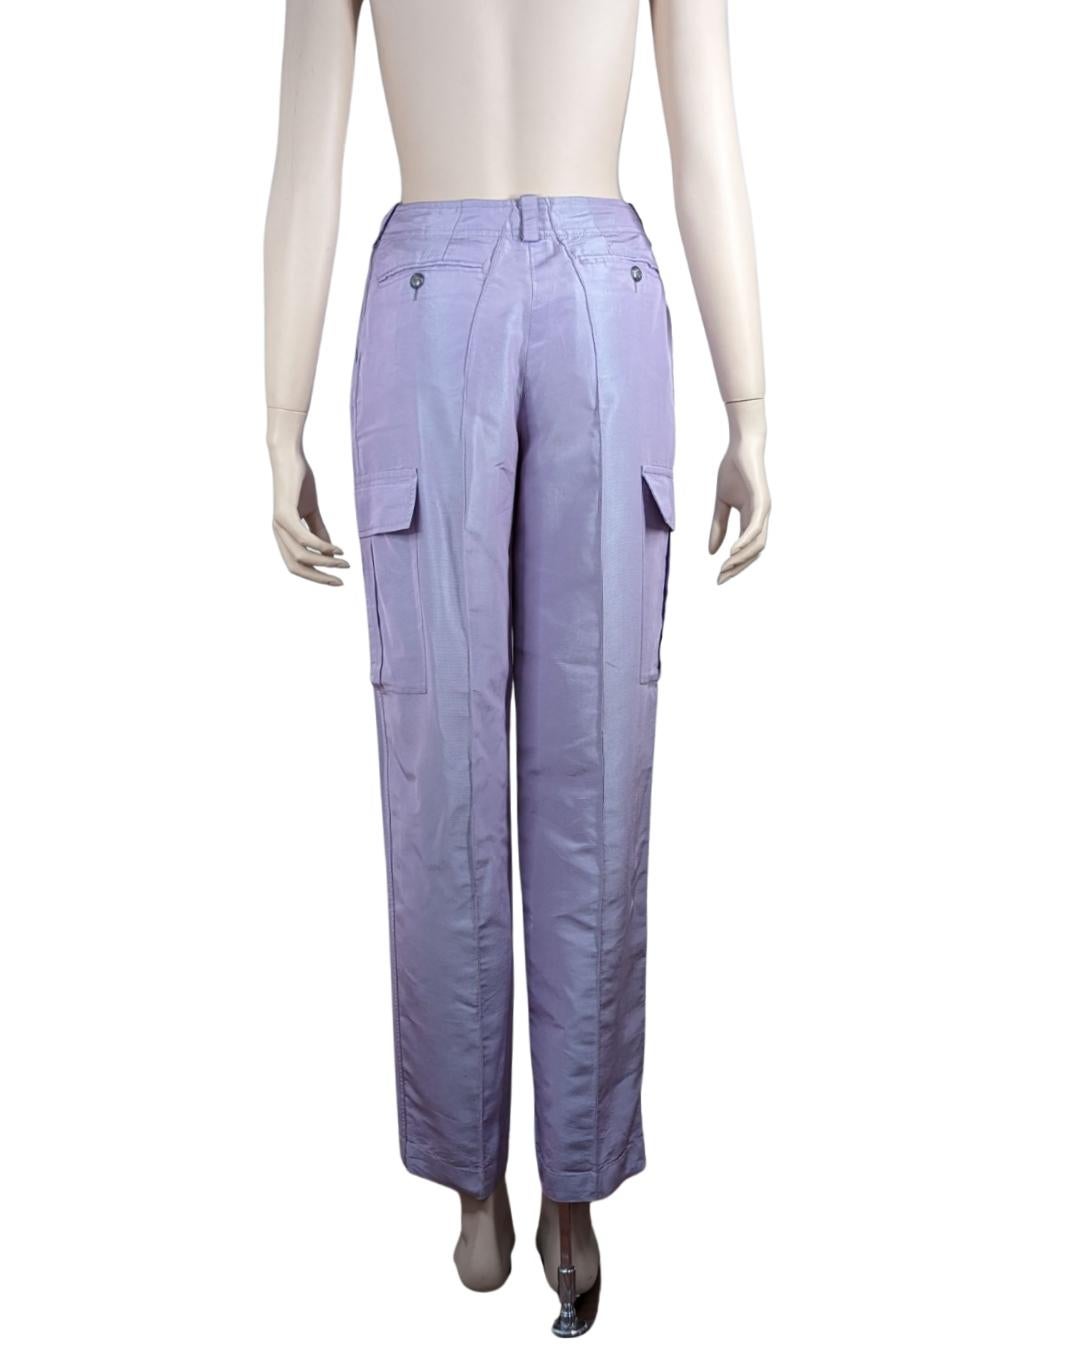 Chanel Fall 1996 Lila Iridescent Cargo Pants In Good Condition For Sale In GOUVIEUX, FR